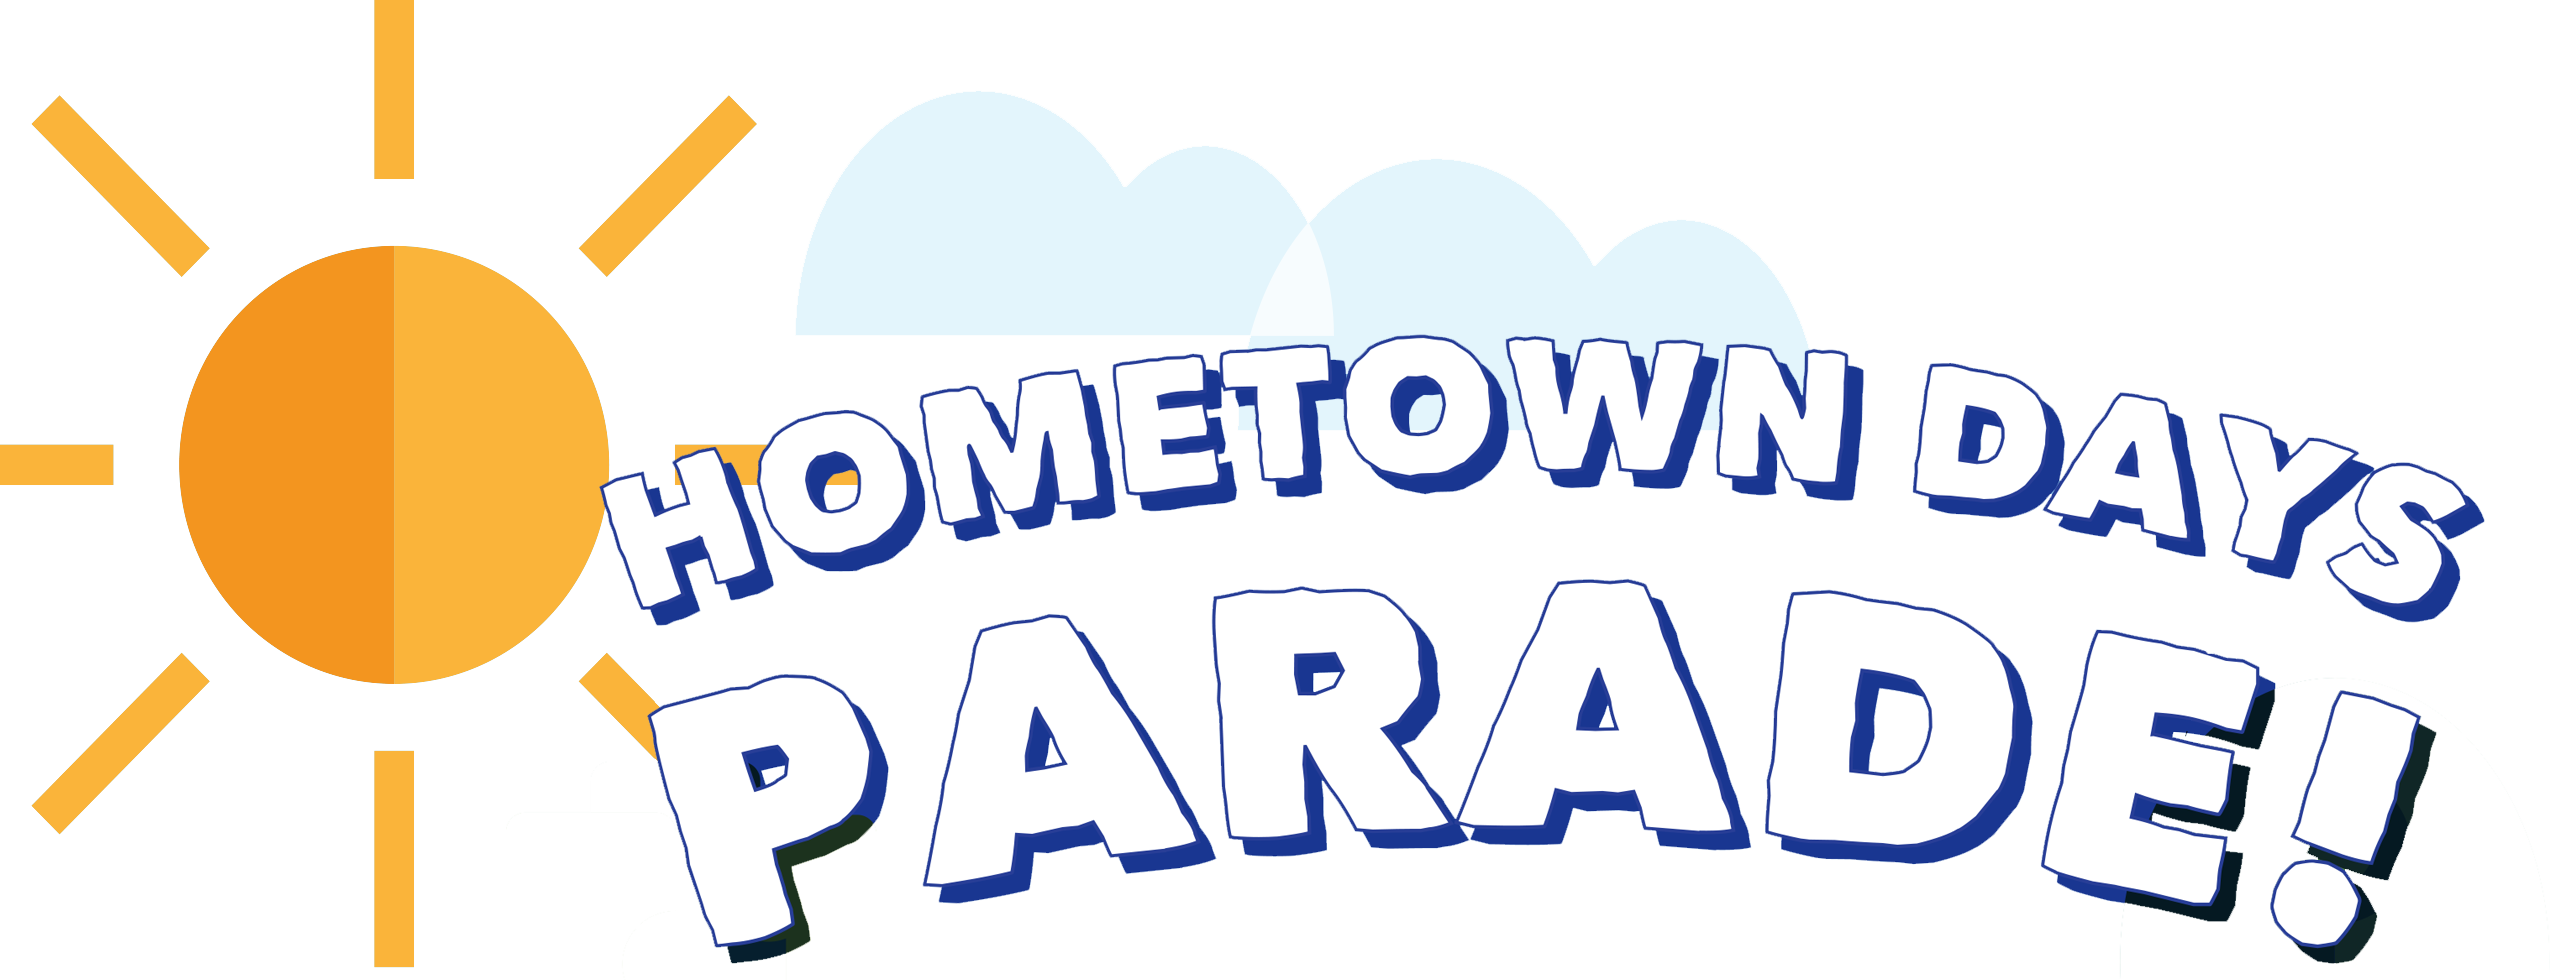 The Hometown Days Parade On Laurel Street Is On Saturday - San Carlos (2550x980)